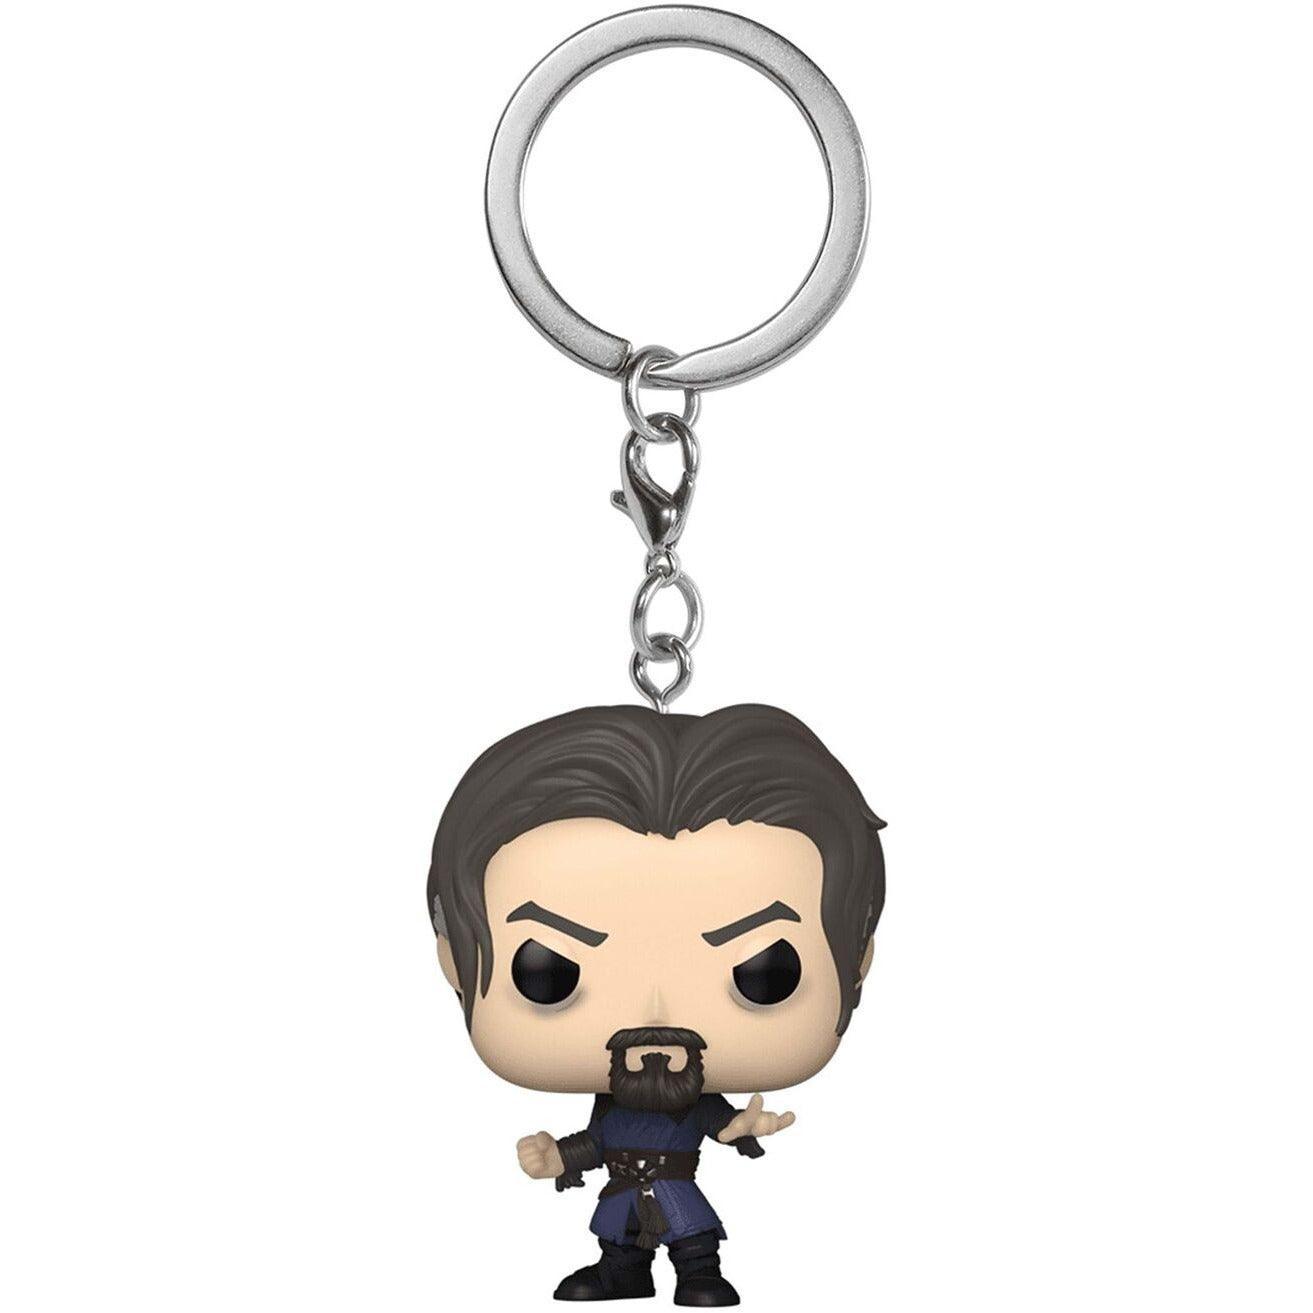 Funko Pop! Keychain Doctor Strange In The Multiverse of Madness - Sinister Strange - BumbleToys - 18+, Action Figures, Boys, Funko, Key Chain